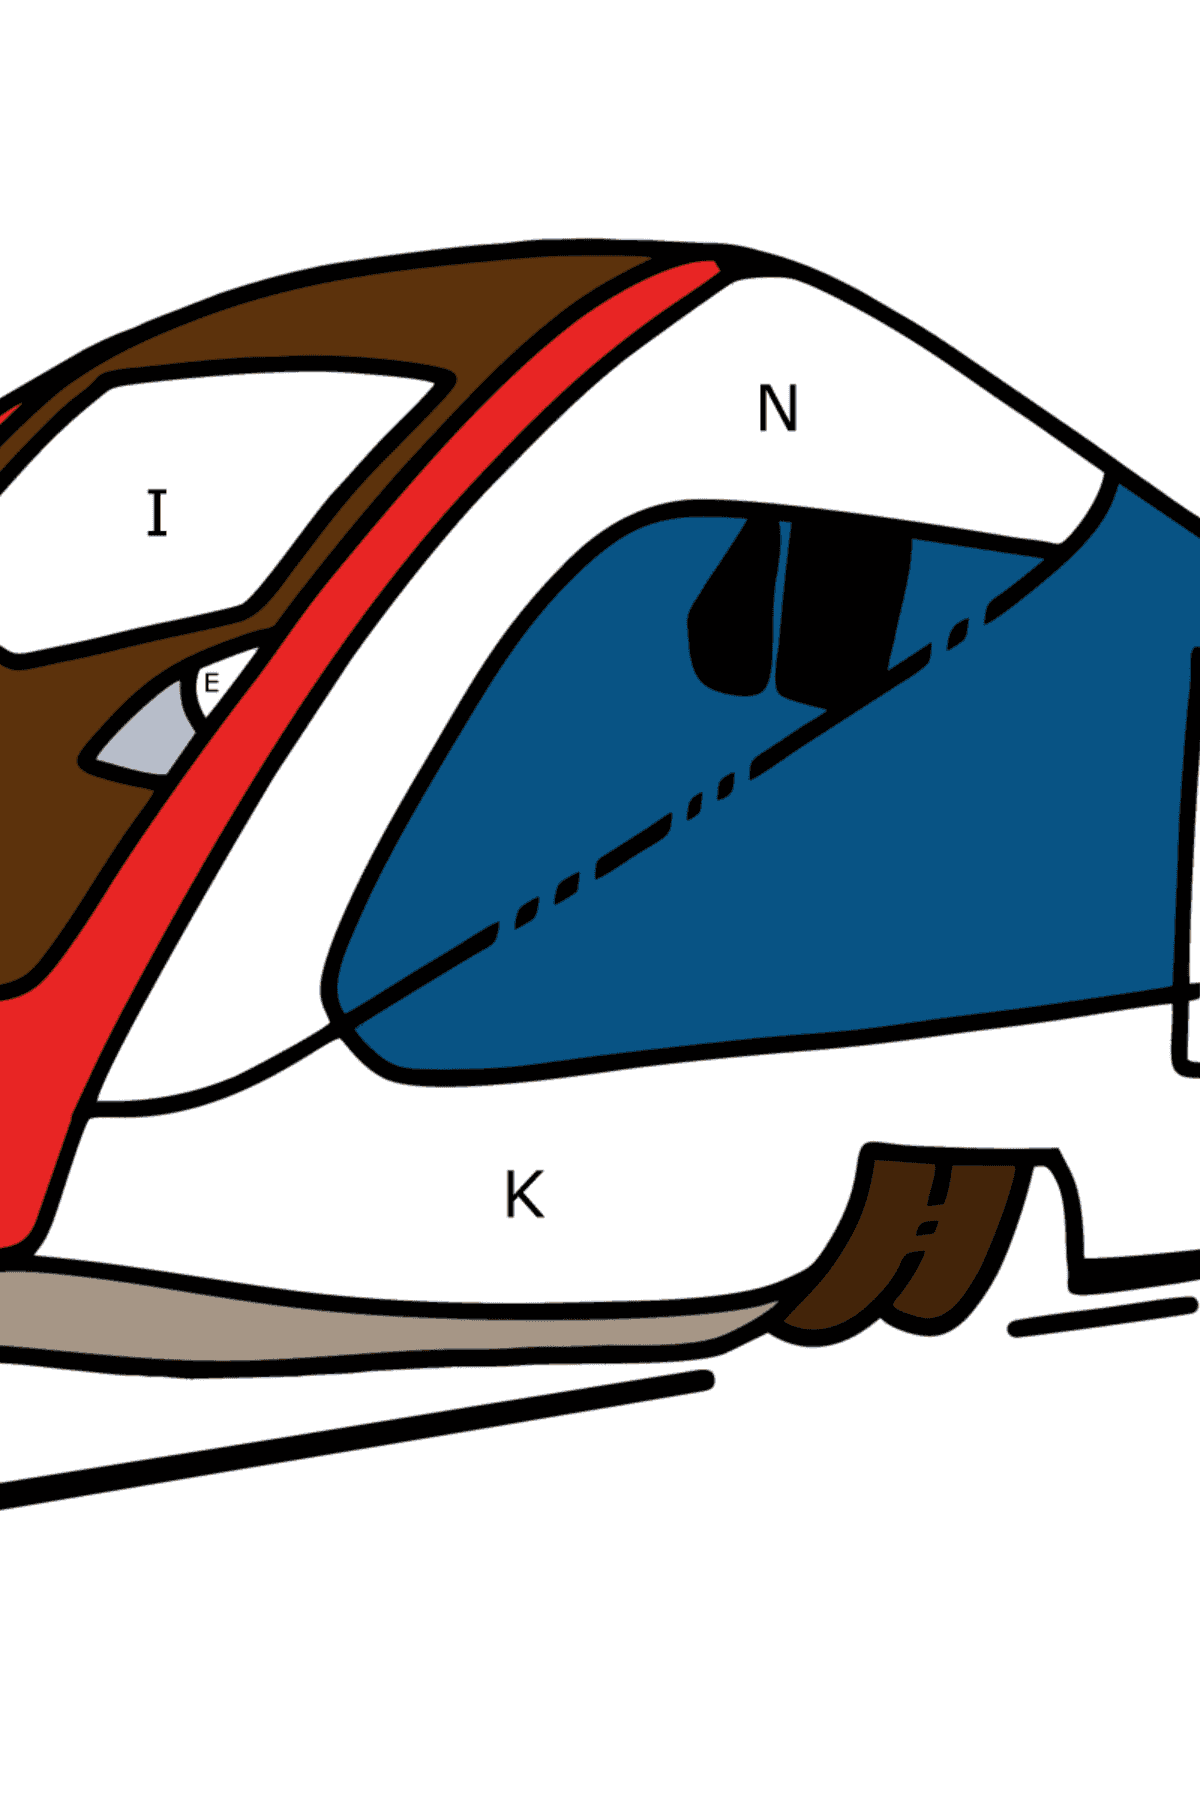 Train coloring page for children - Coloring by Letters for Kids